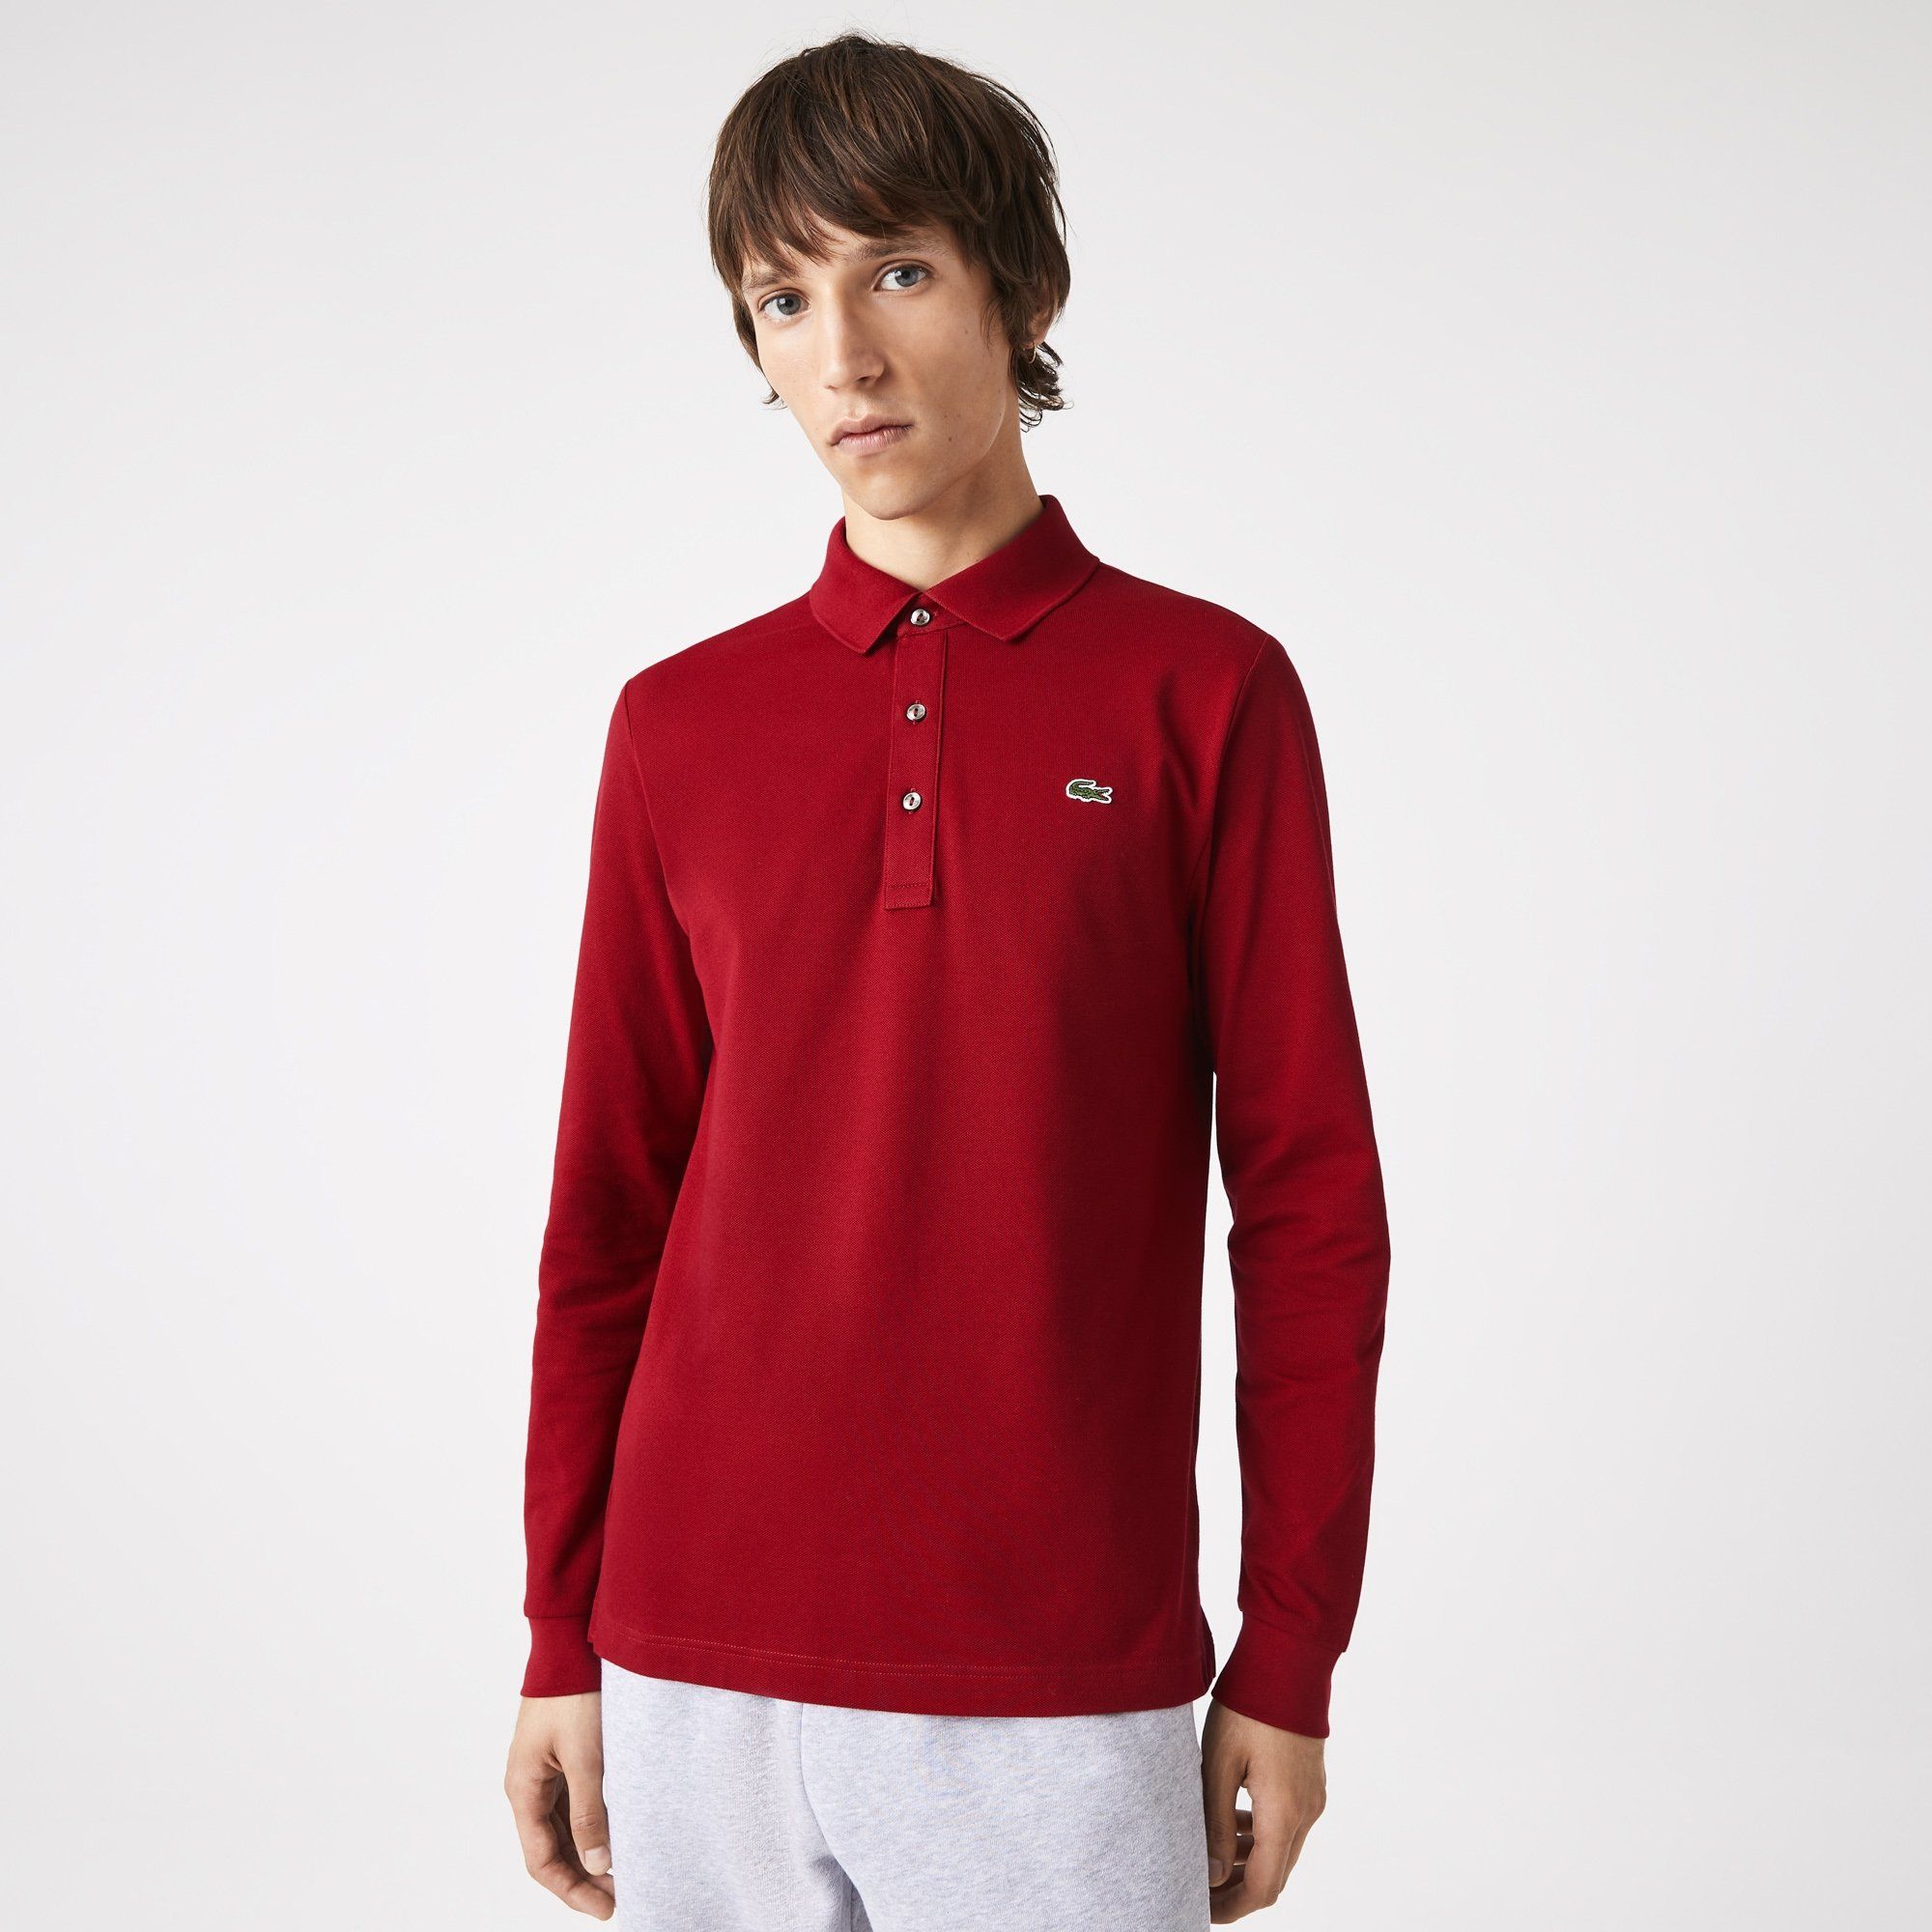  Lacoste Long Sleeved Slim Fit Stretch Polo Shirt - Bordeaux 